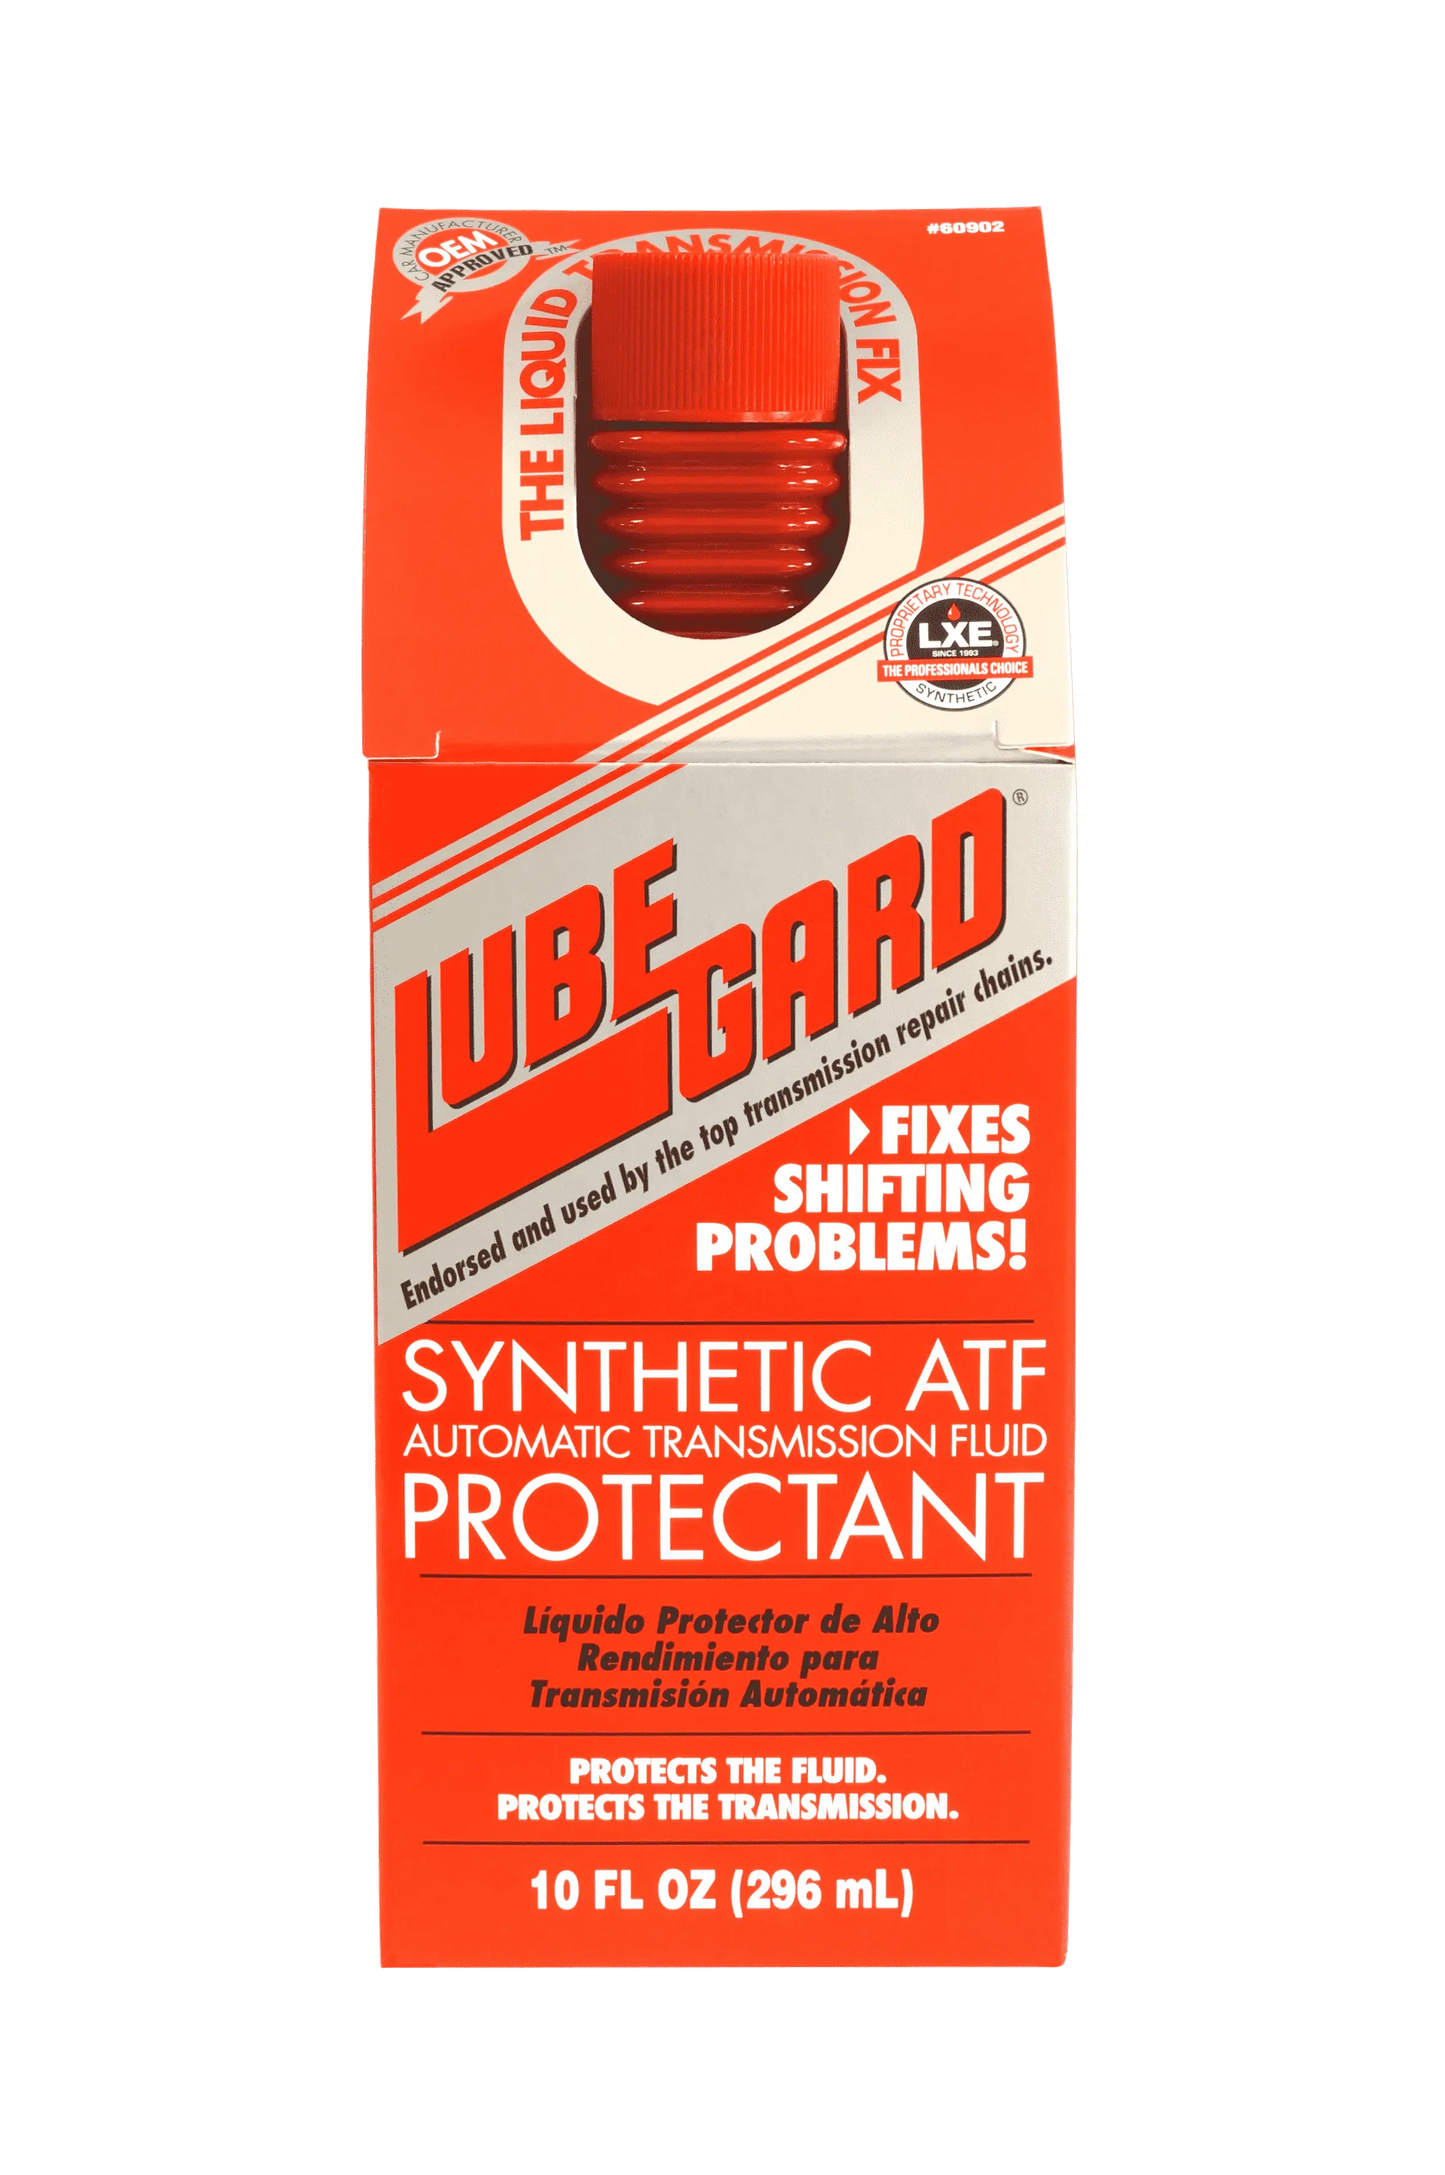 Buy now from Sussex Autos LubeGard "Red" Synthetic Automatic Transmission Fluid Protectant (296 mL)